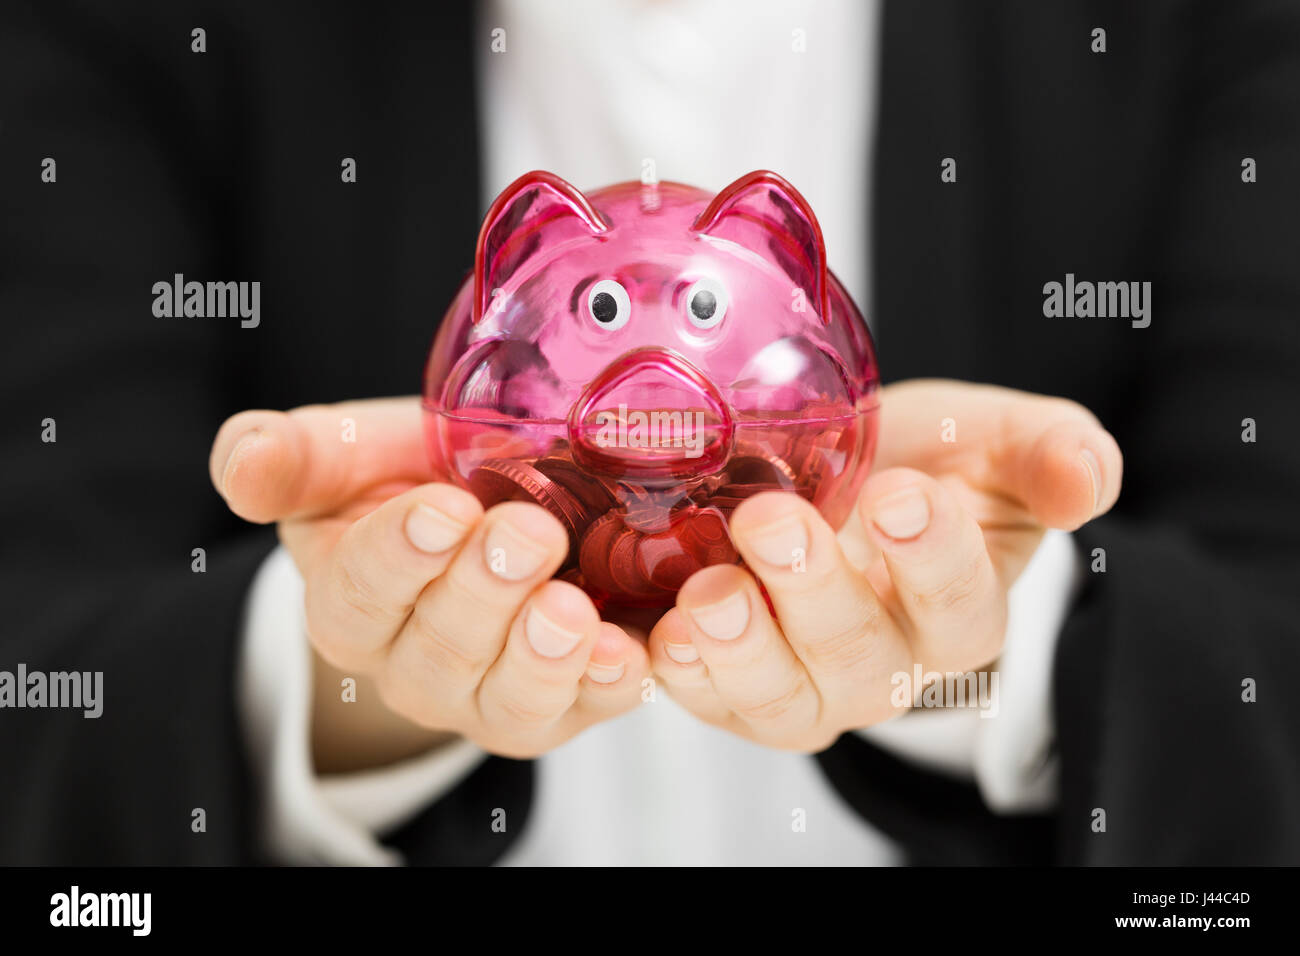 business profit savings concept - woman holding piggy bank in hands Stock Photo